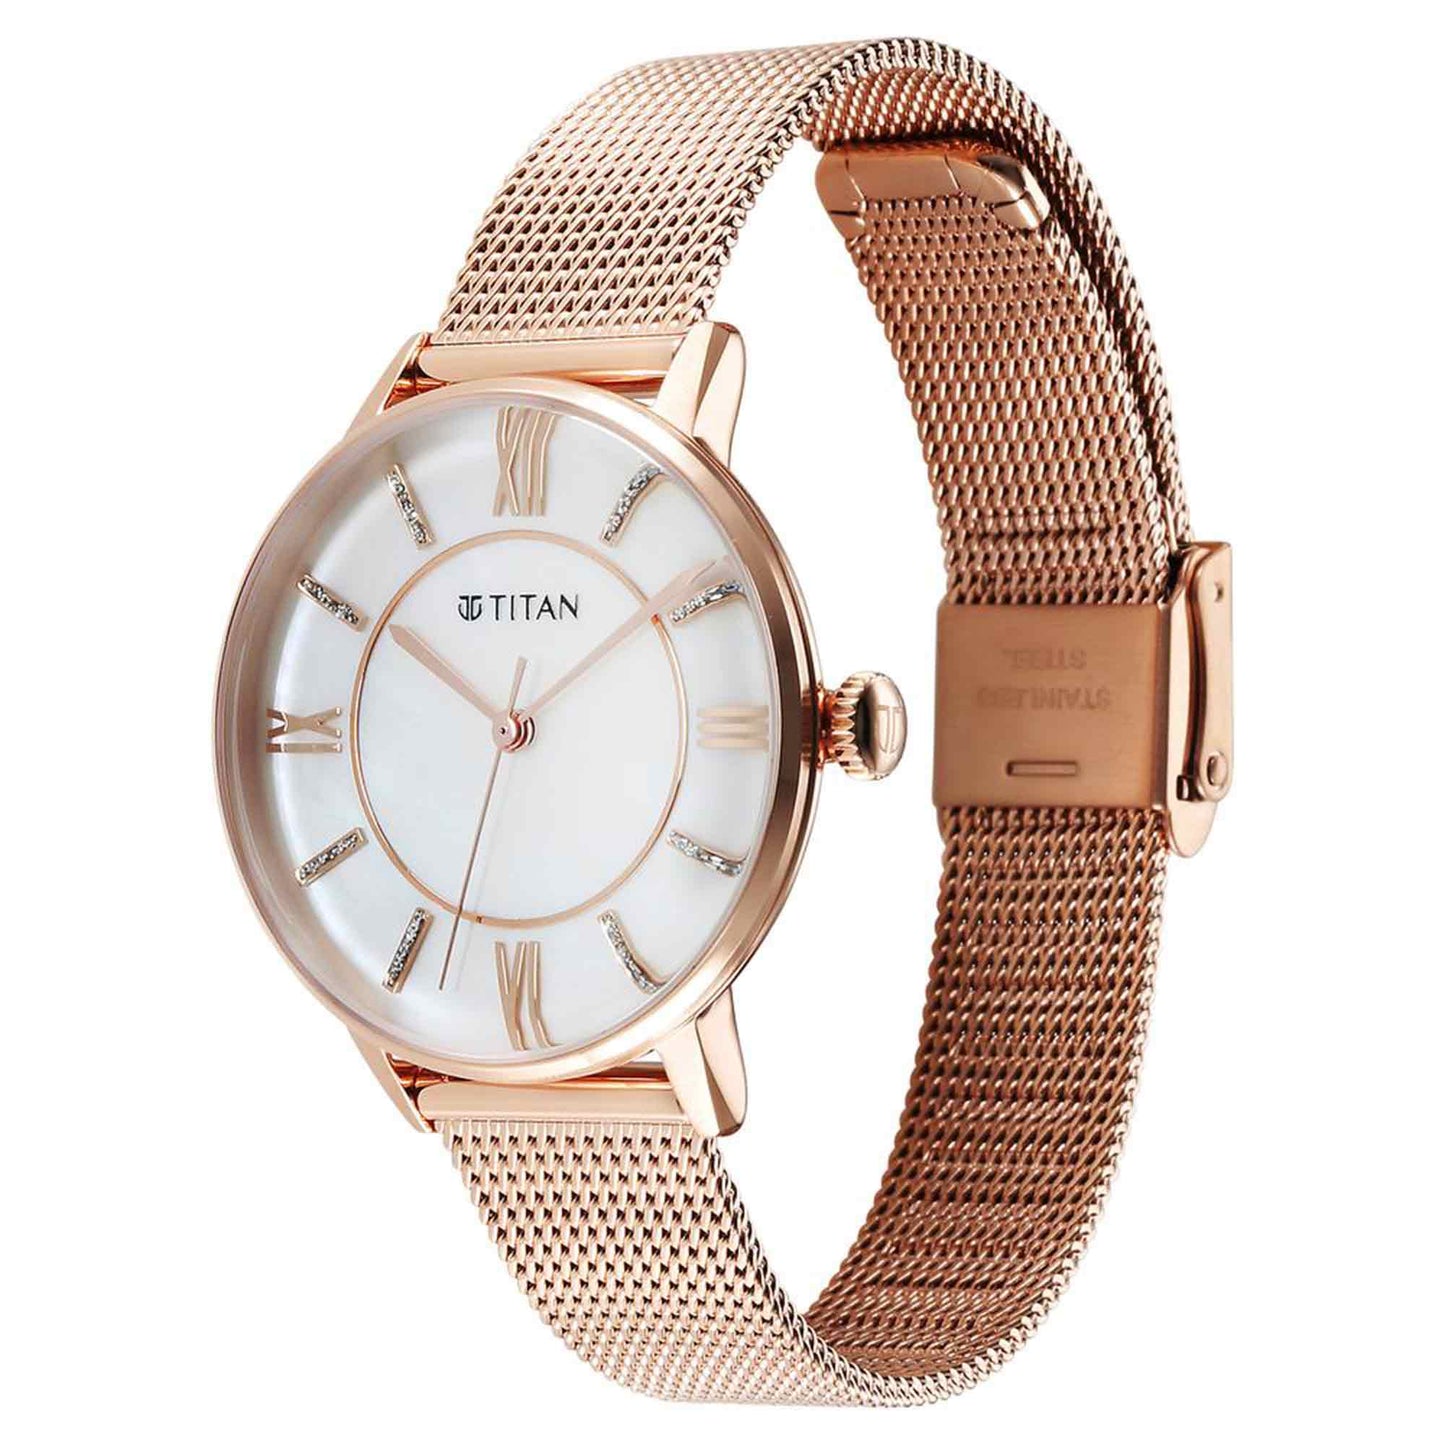 Titan TGIF Quartz Analog Mother Of Pearl Dial Rose Gold Stainless Steel Strap Watch for Women